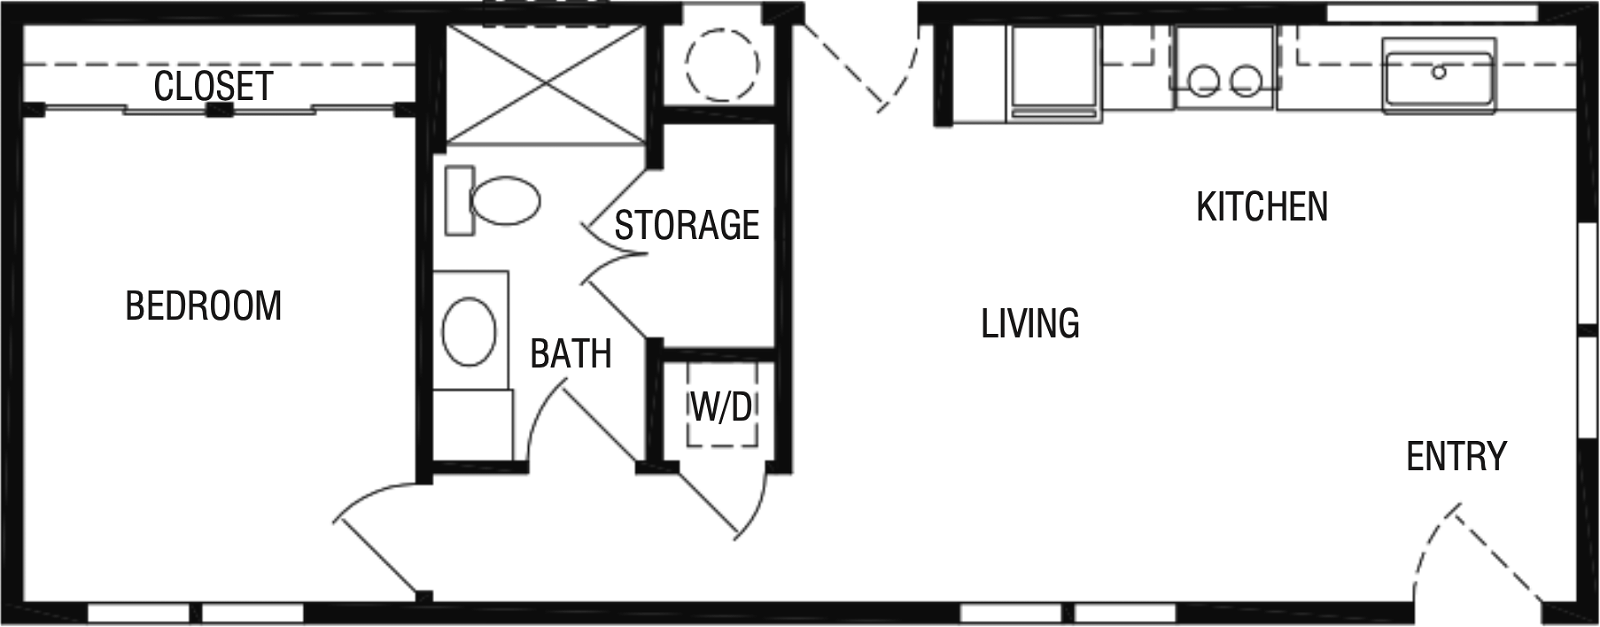 The piedmont (34') floor plan cropped home features